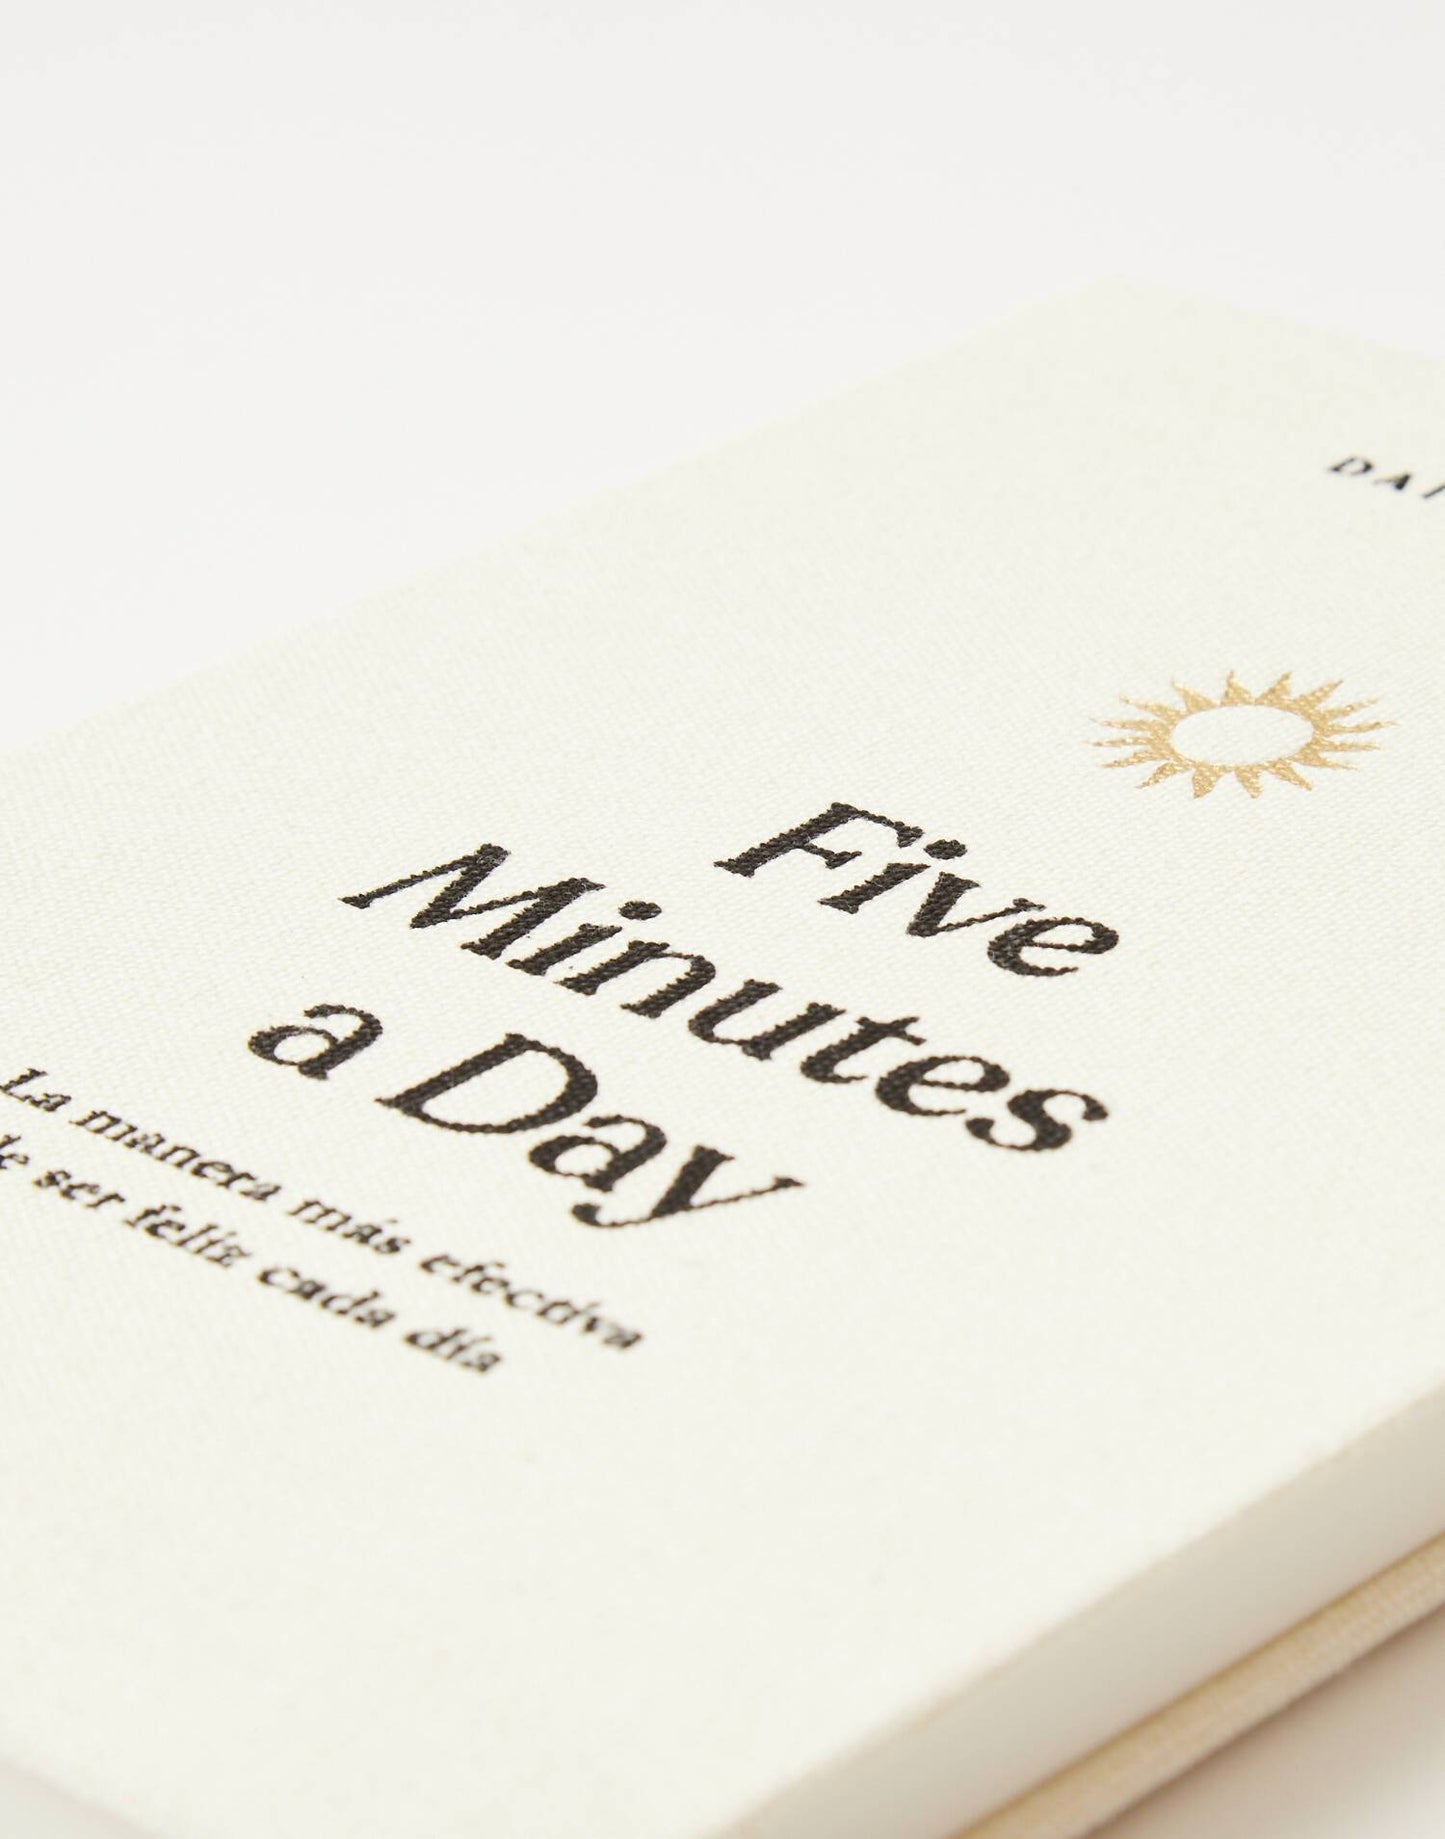 5 minuts a day notebook